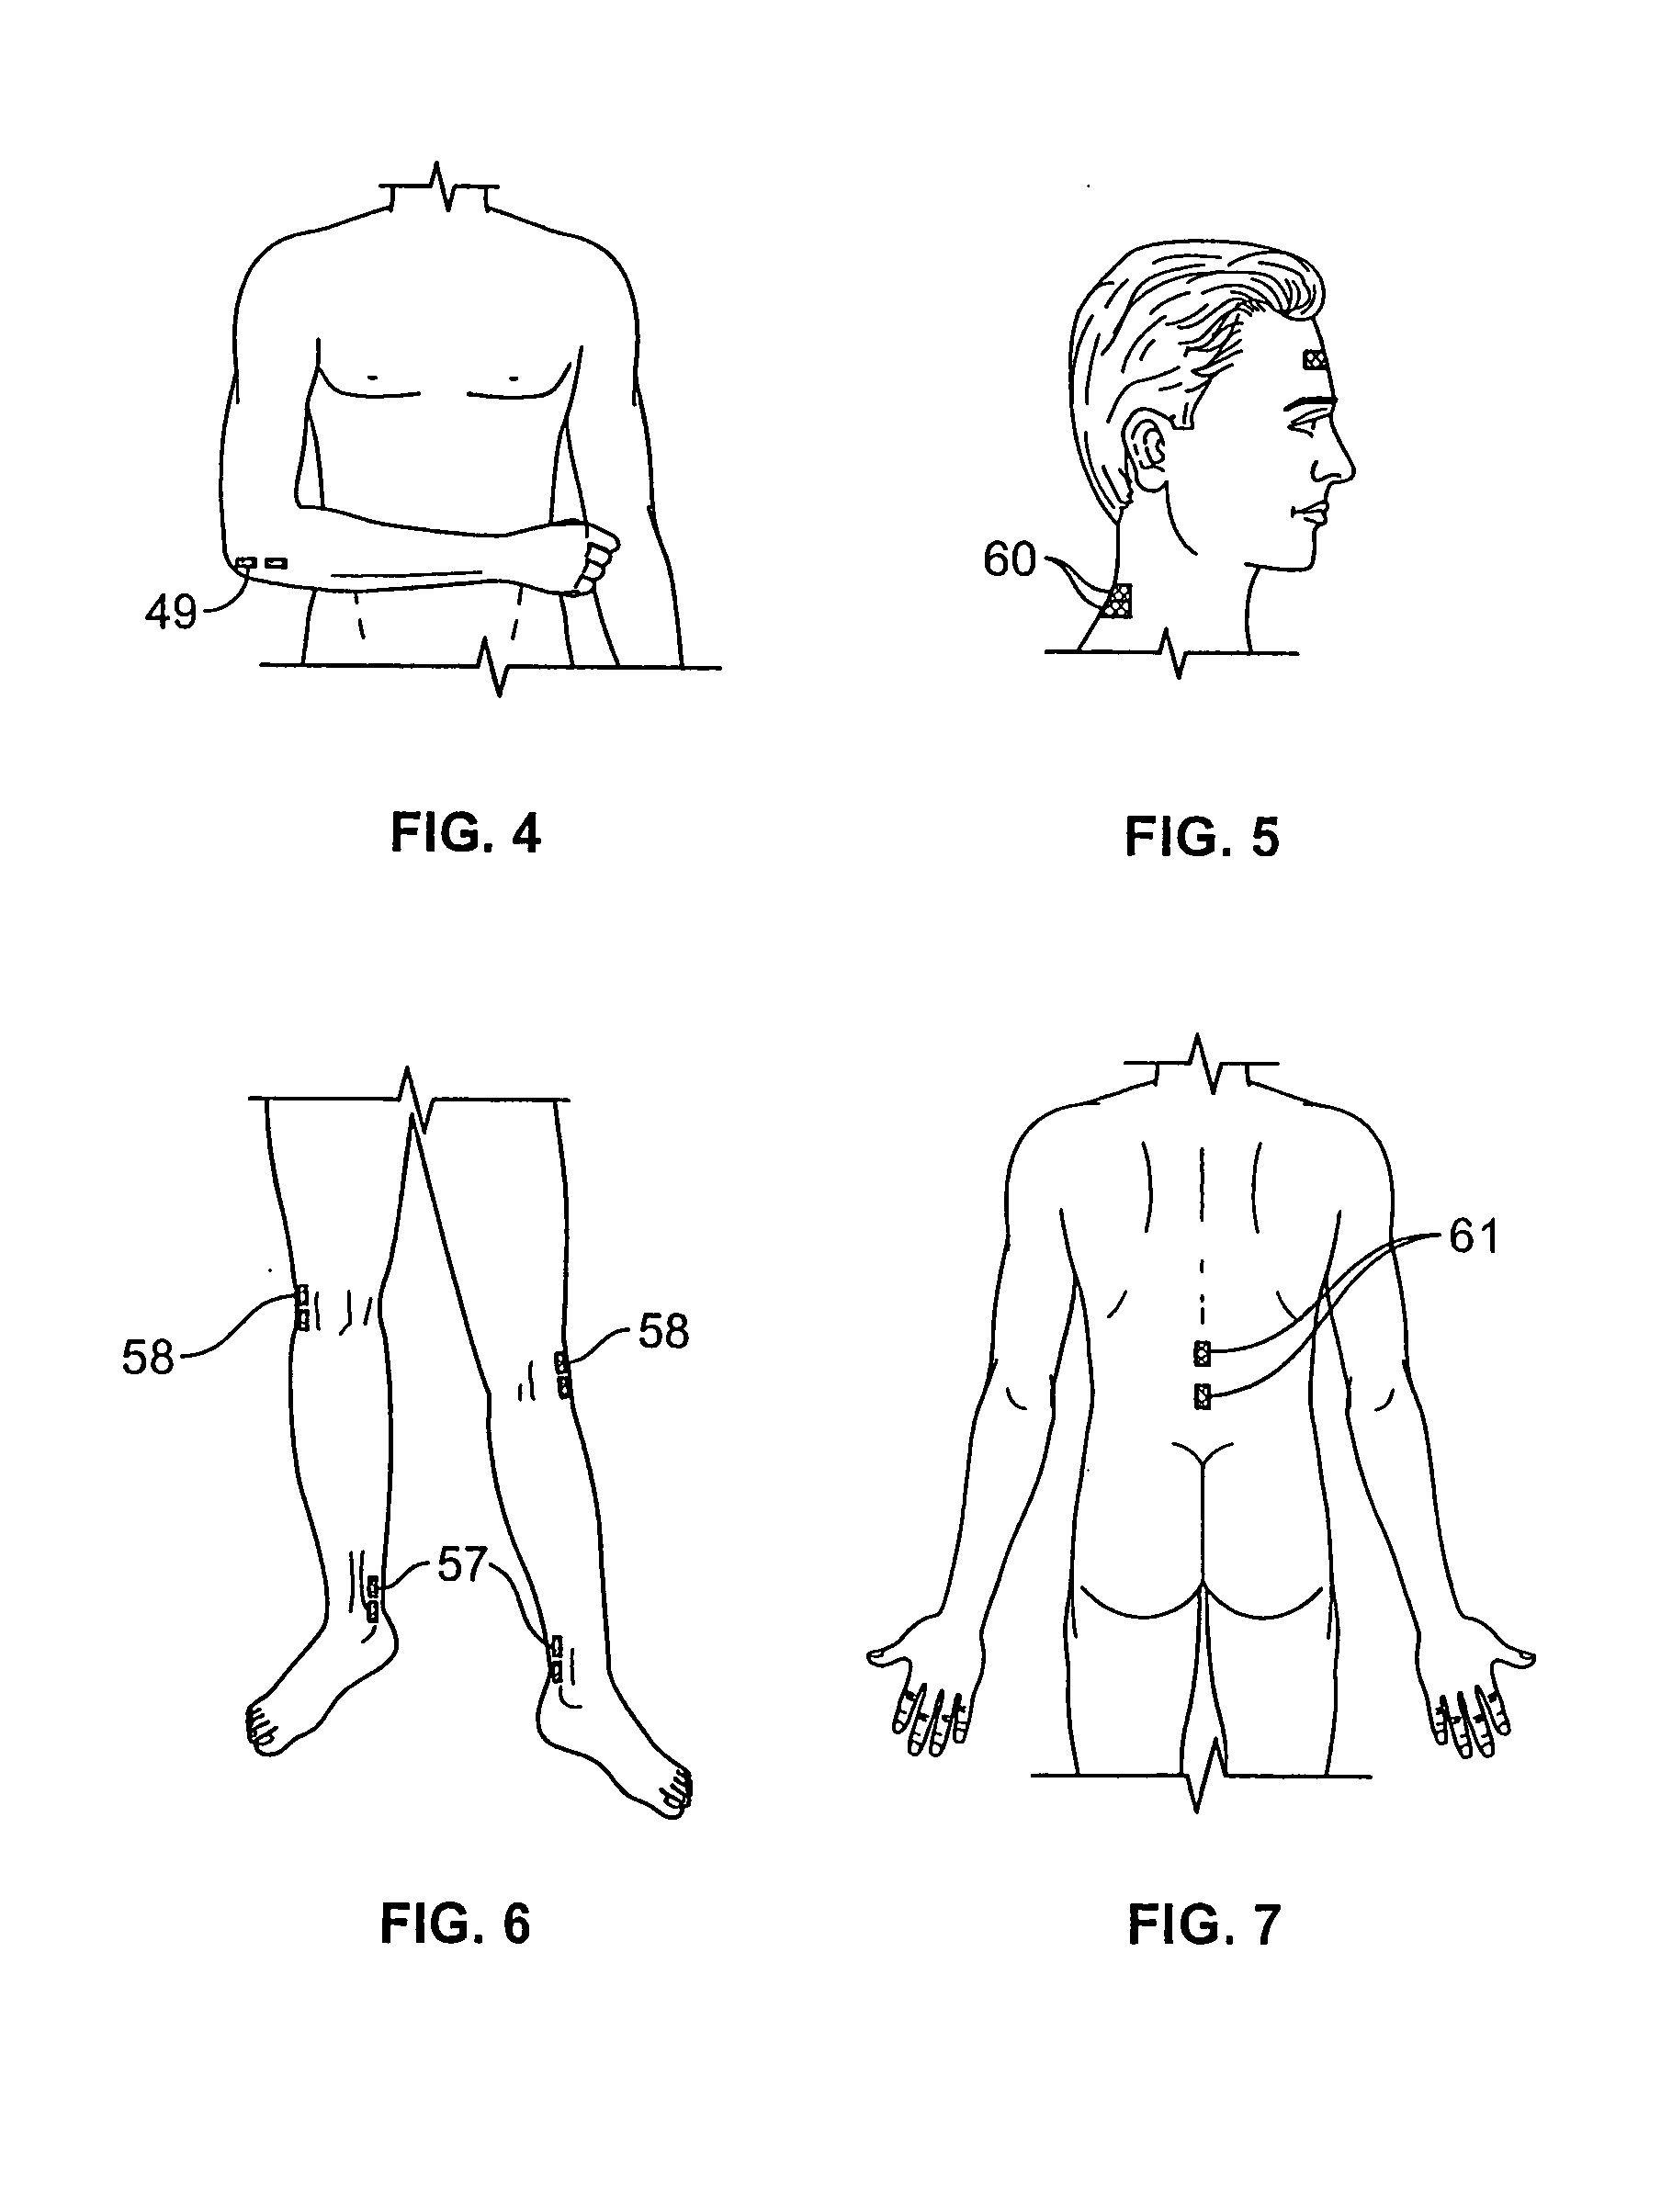 Methods & systems for intraoperatively monitoring nerve & muscle frequency latency and amplitude